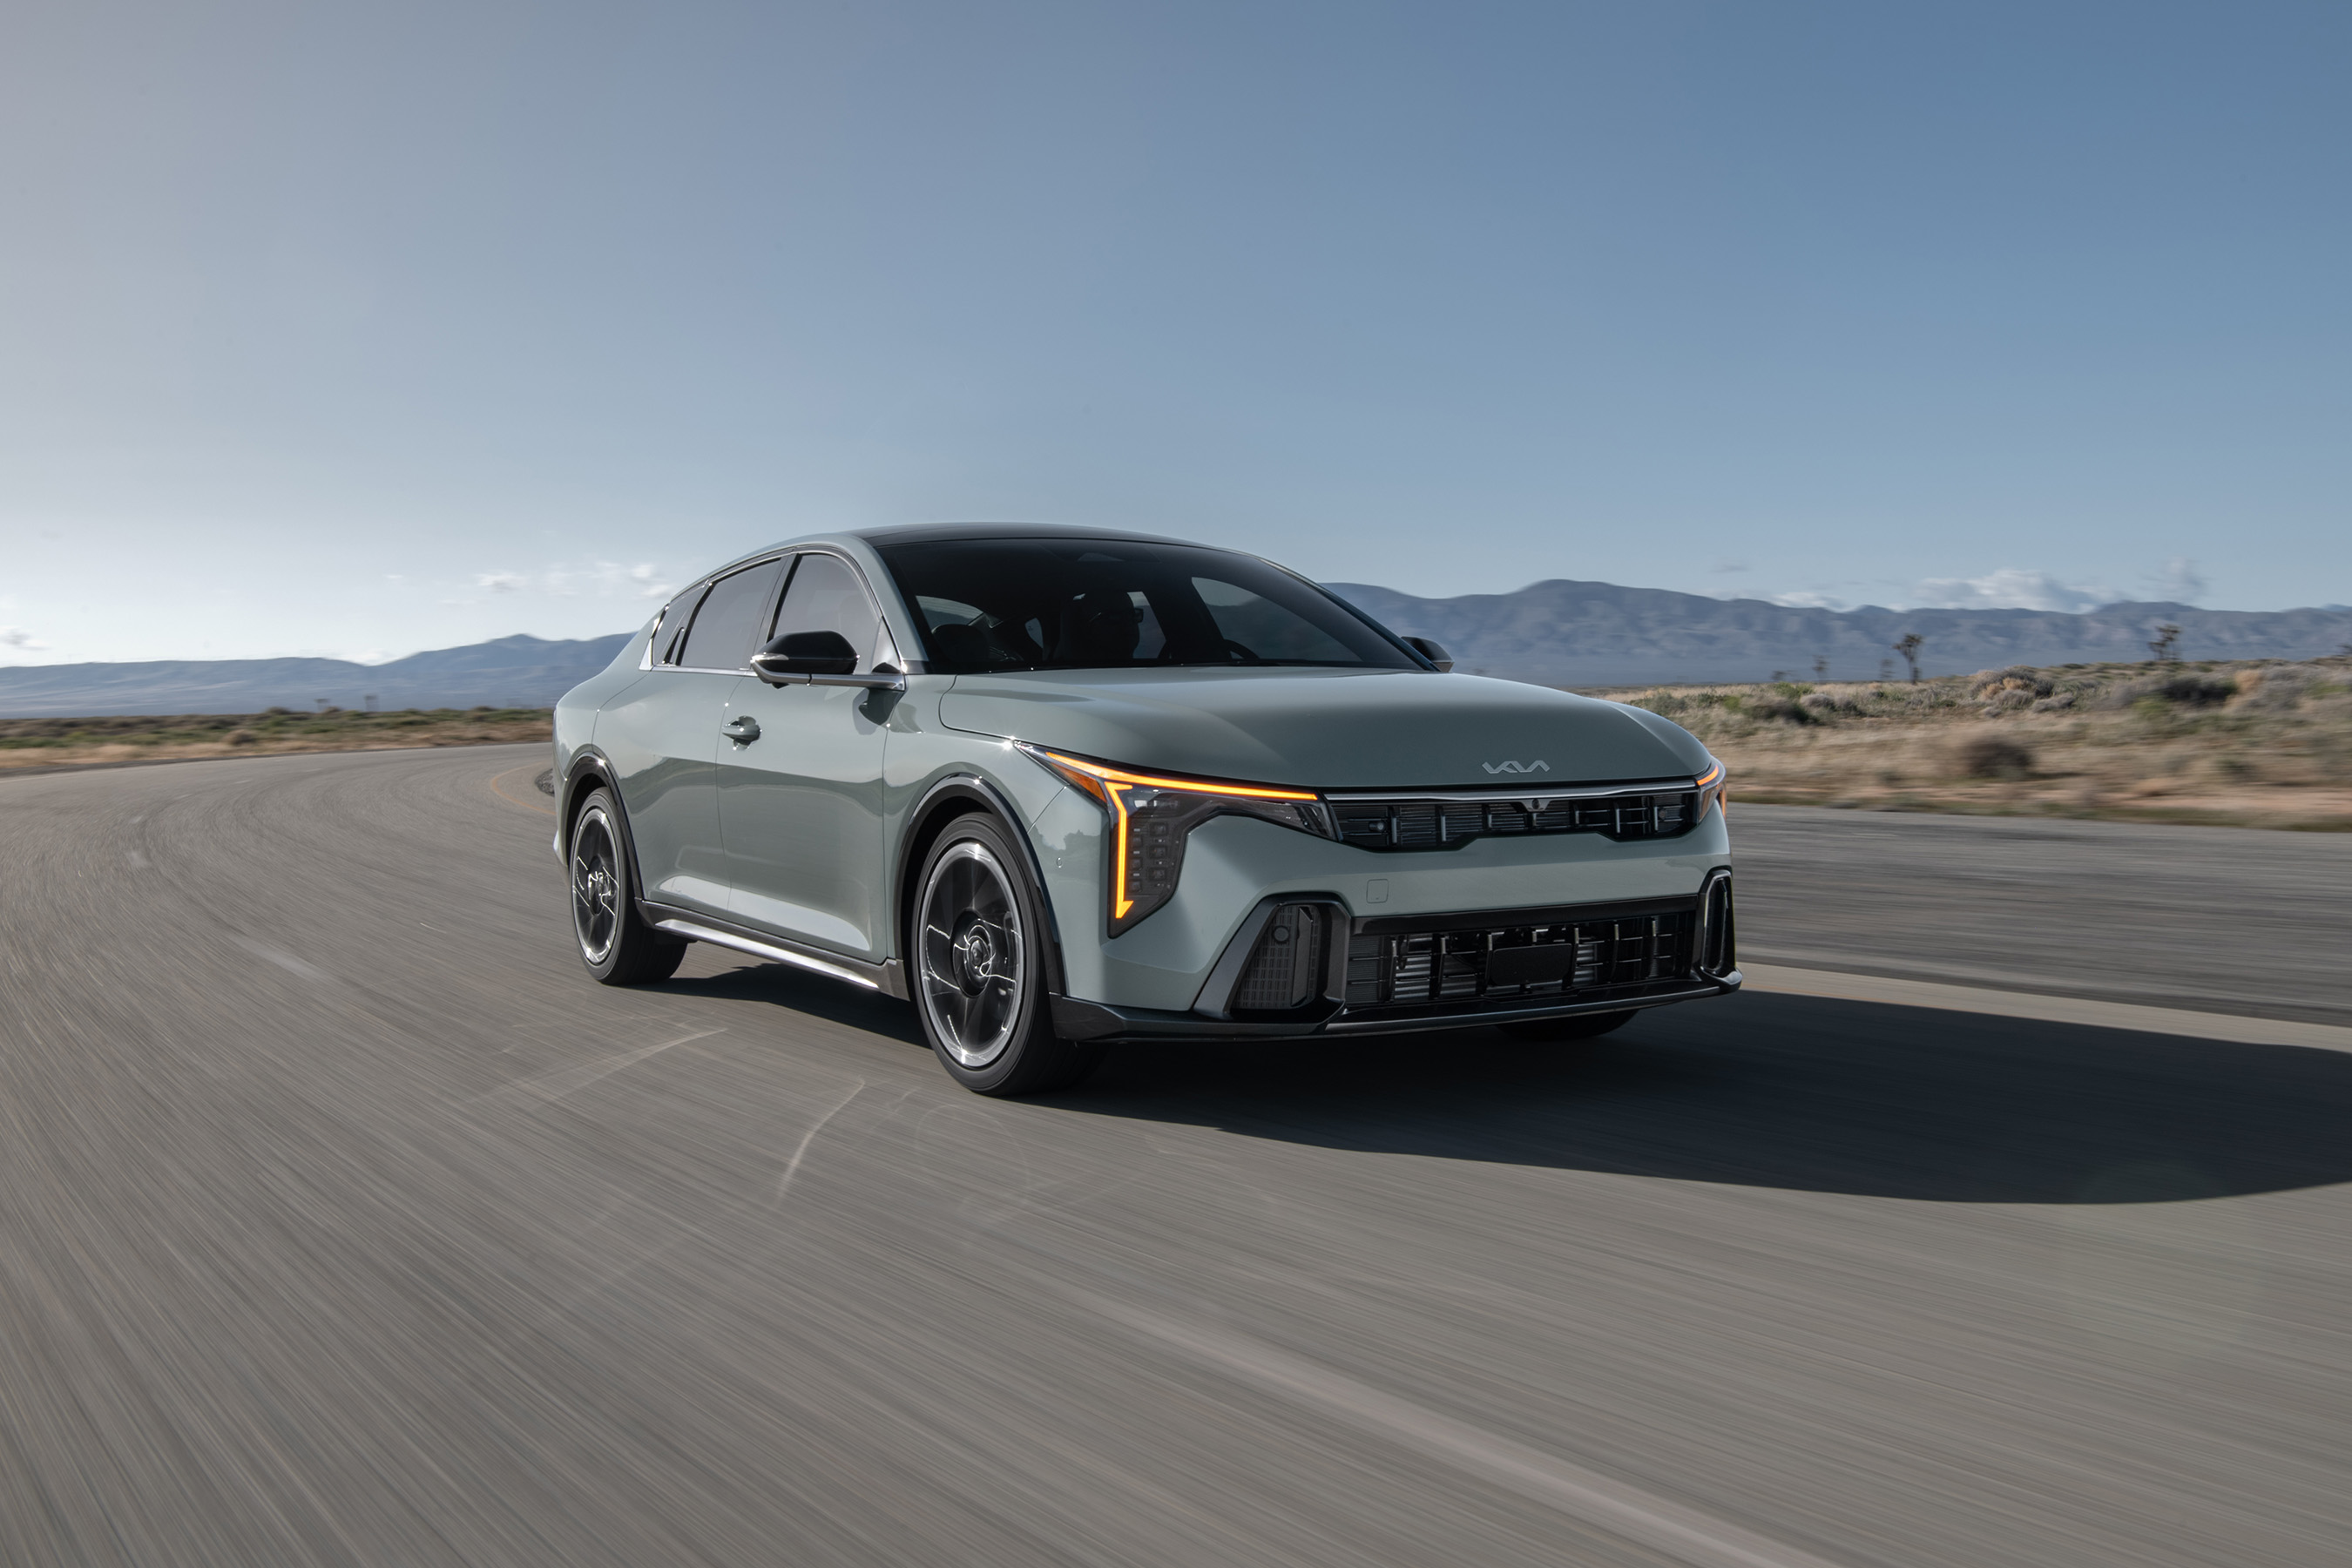 The all-new 2025 Kia K4 elevates the Compact Sedan segment with more room, segment-above tech and available turbocharged fun.